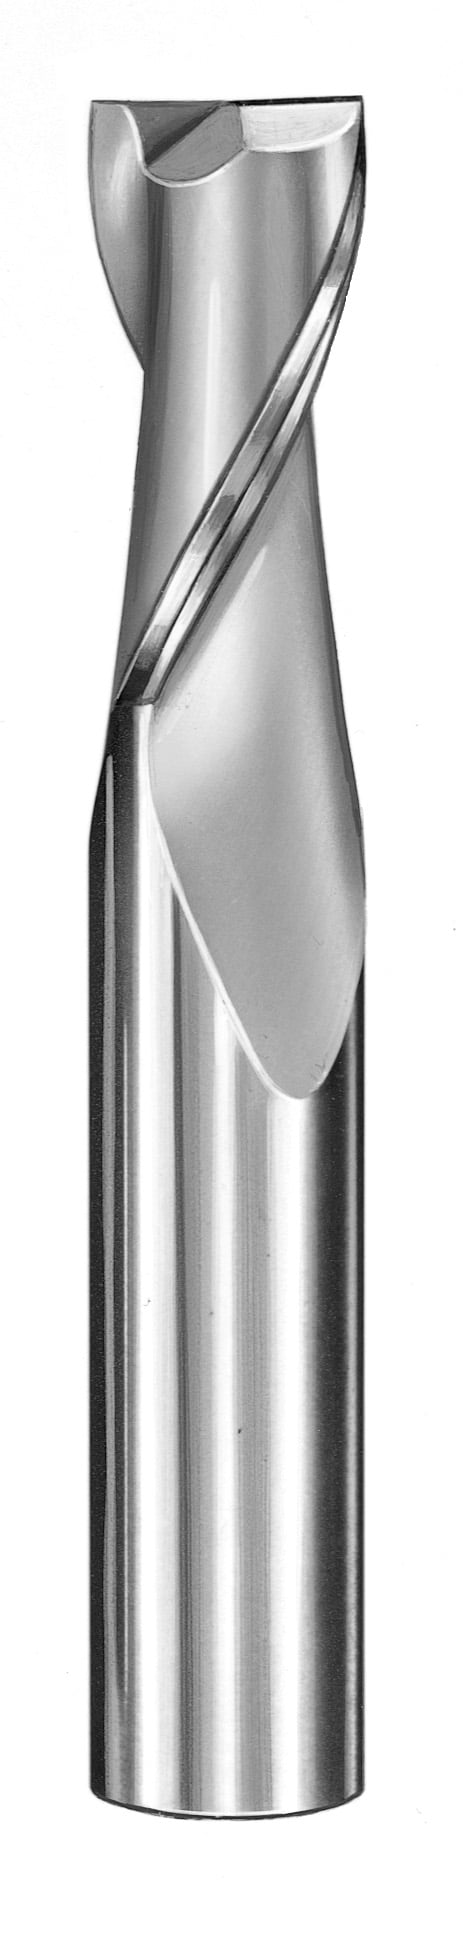 5/64" Dia, 2 Flute, Square End End Mill - 30309